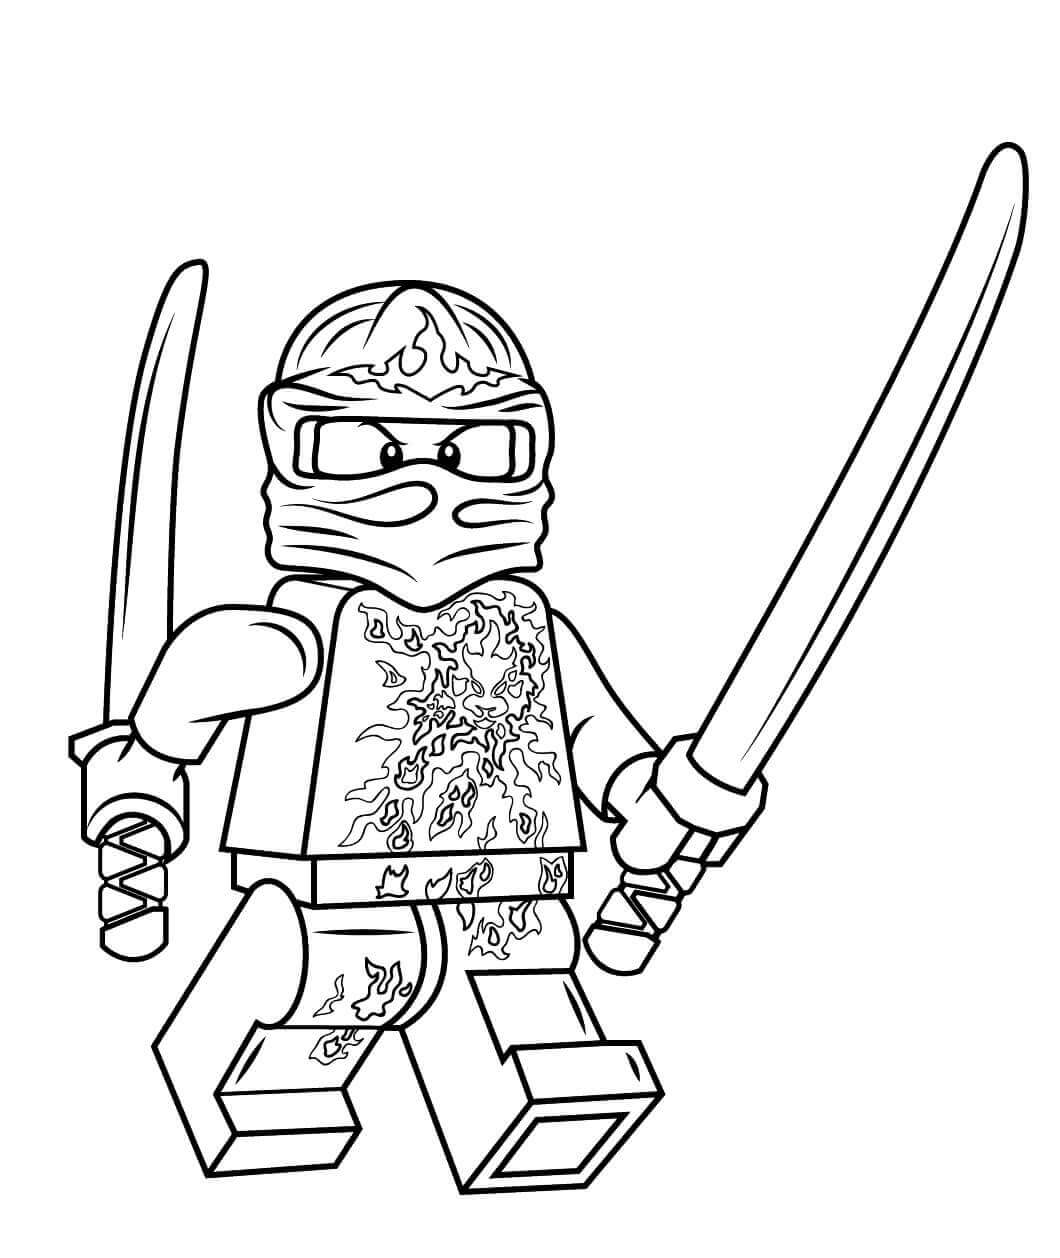 Cartoon Lego Ninjago Online Coloring Pages for Kids